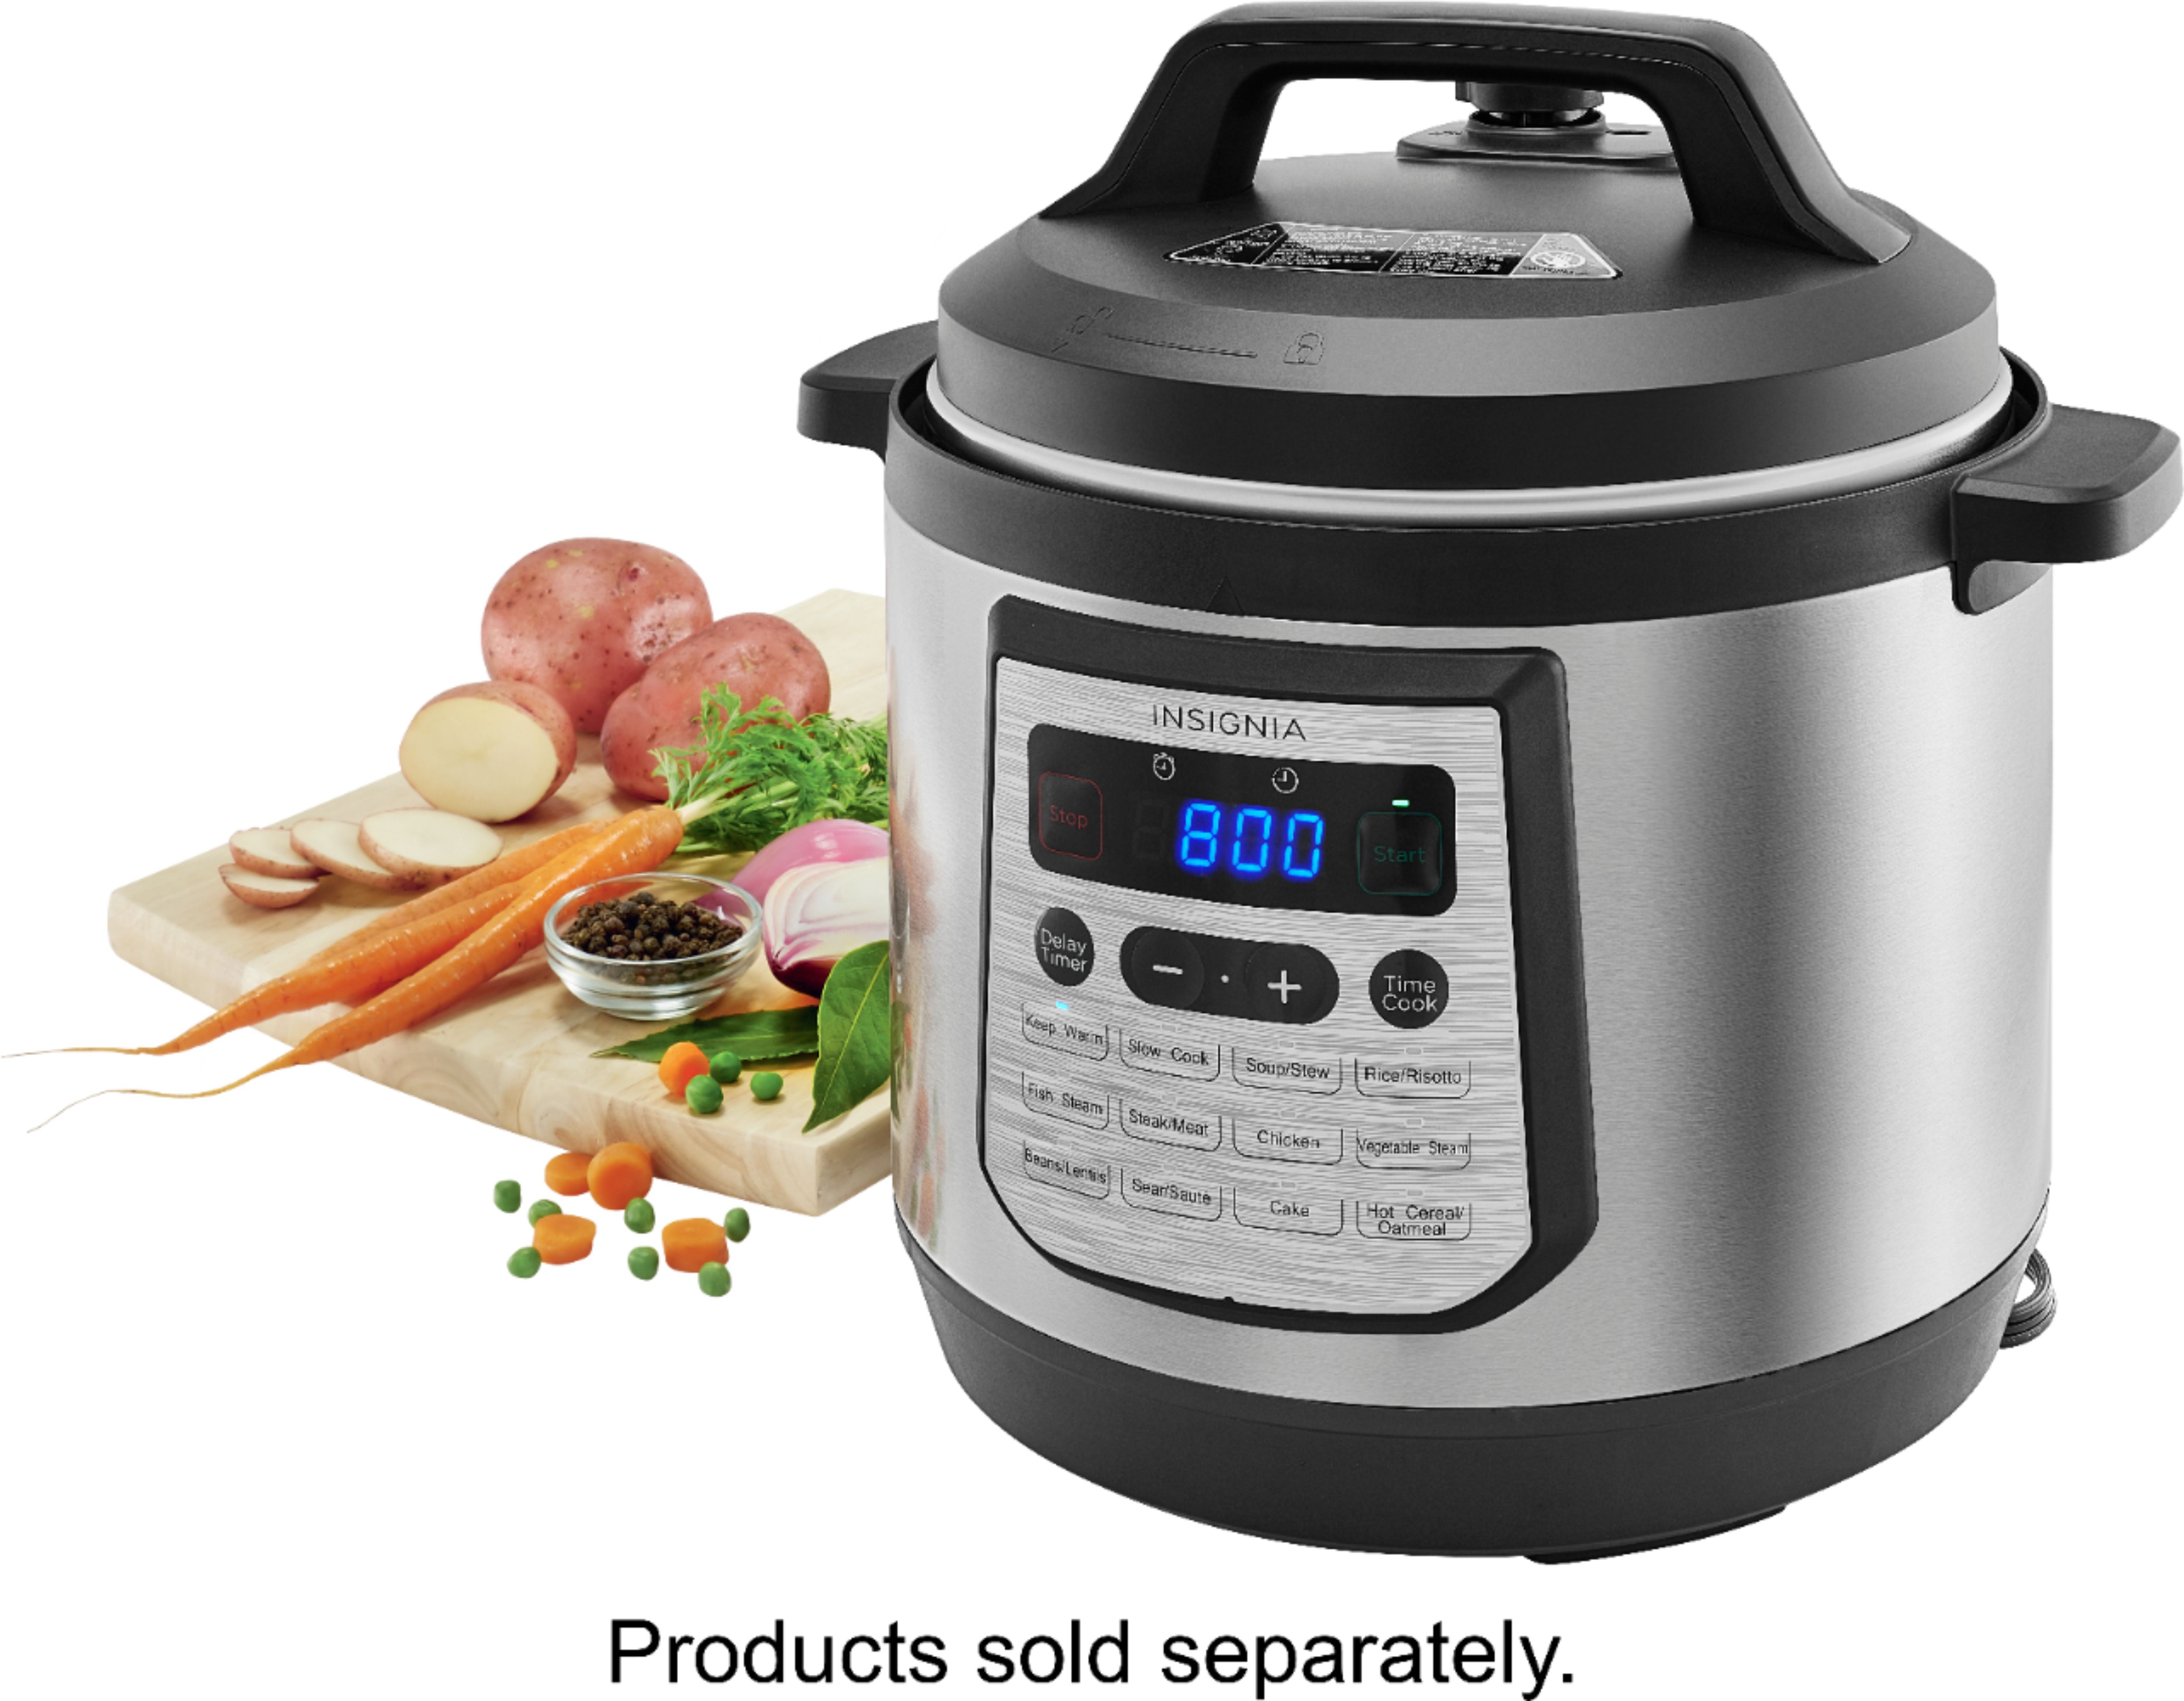 Insignia™ 8qt Digital Multi Cooker Stainless Steel NS-MC80SS9 - Best Buy $39.99